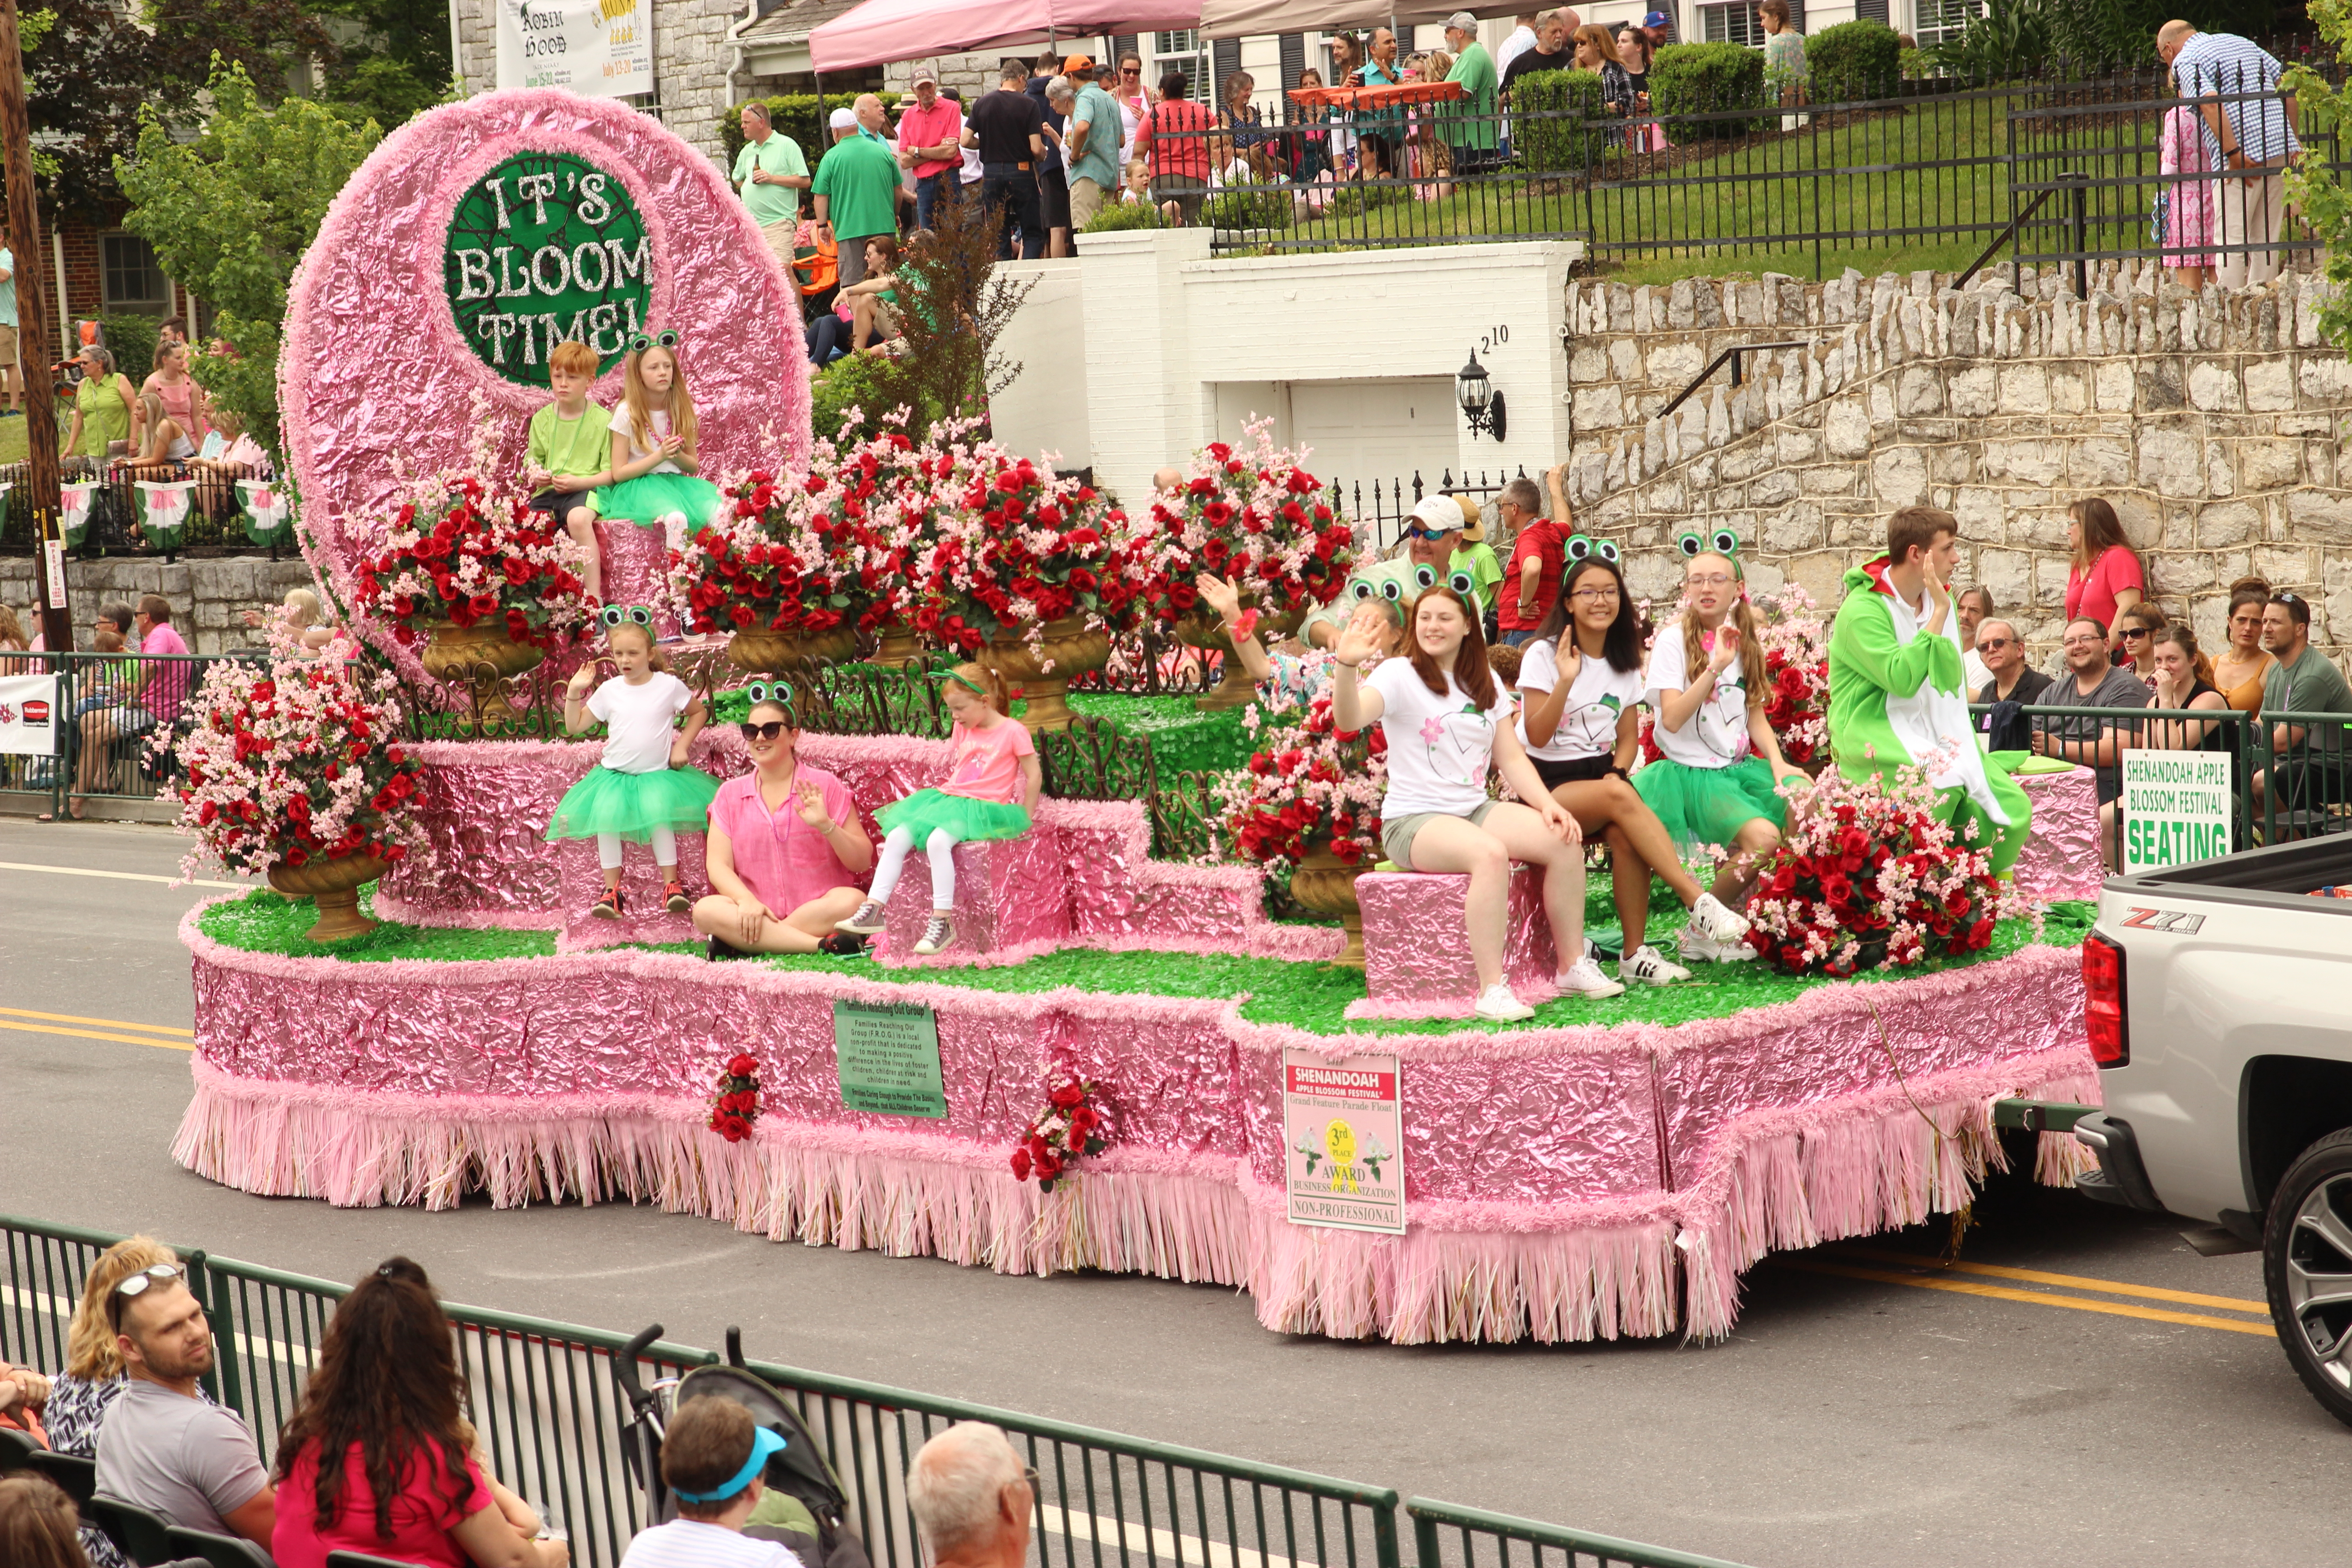 Kids ride on a pink float with sign announcing "it's bloom time!"